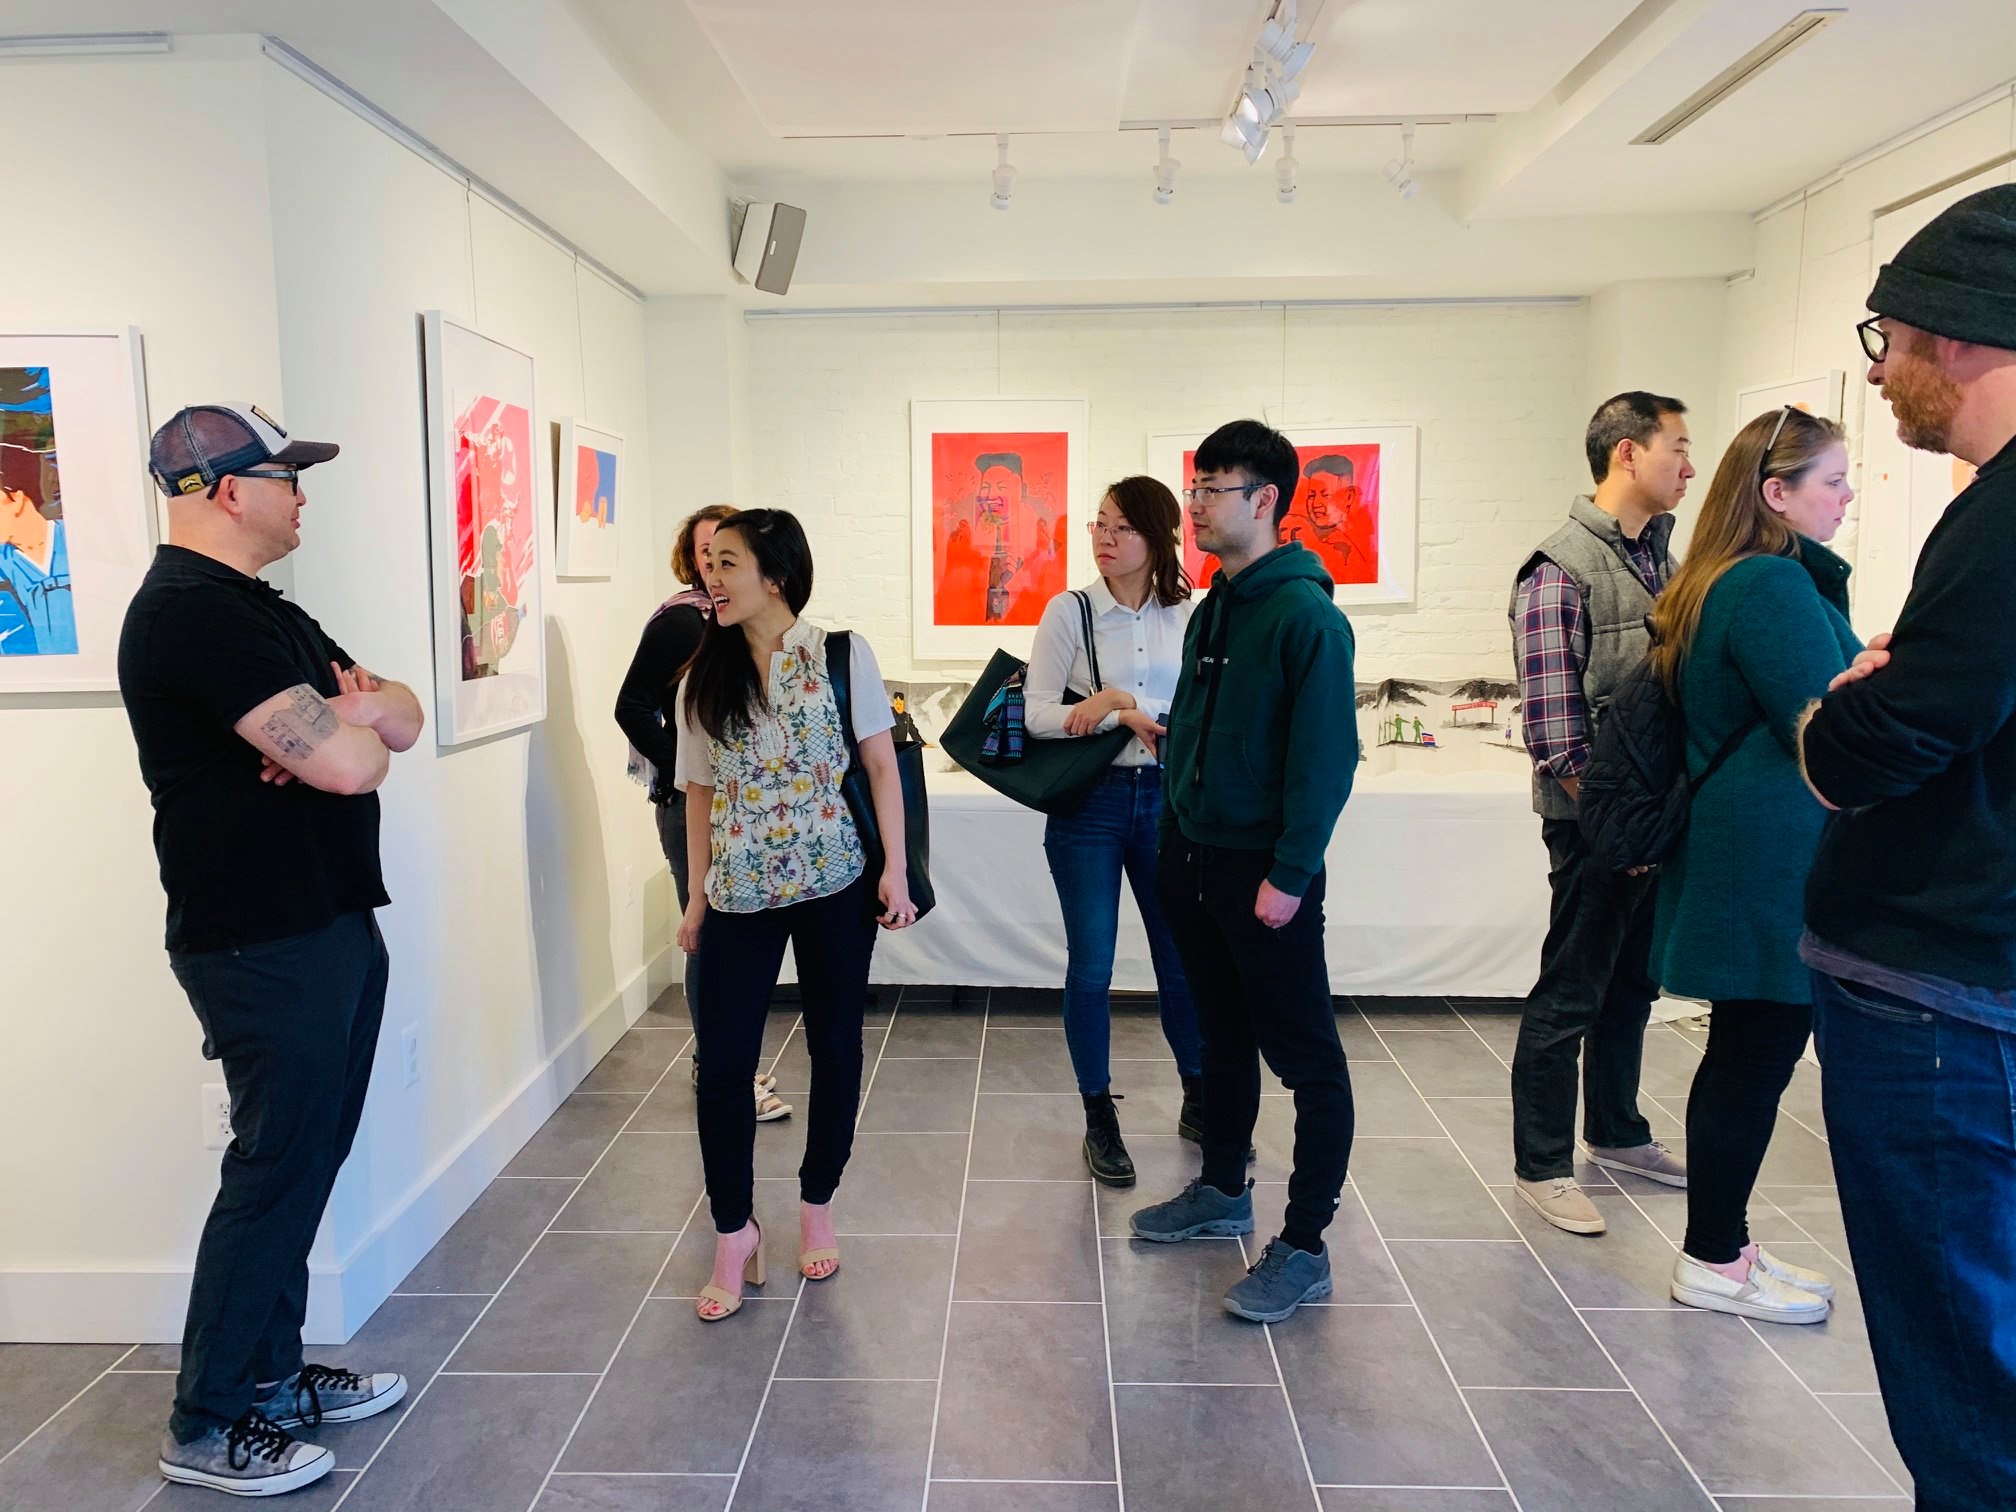 A group of people standing in a gallery